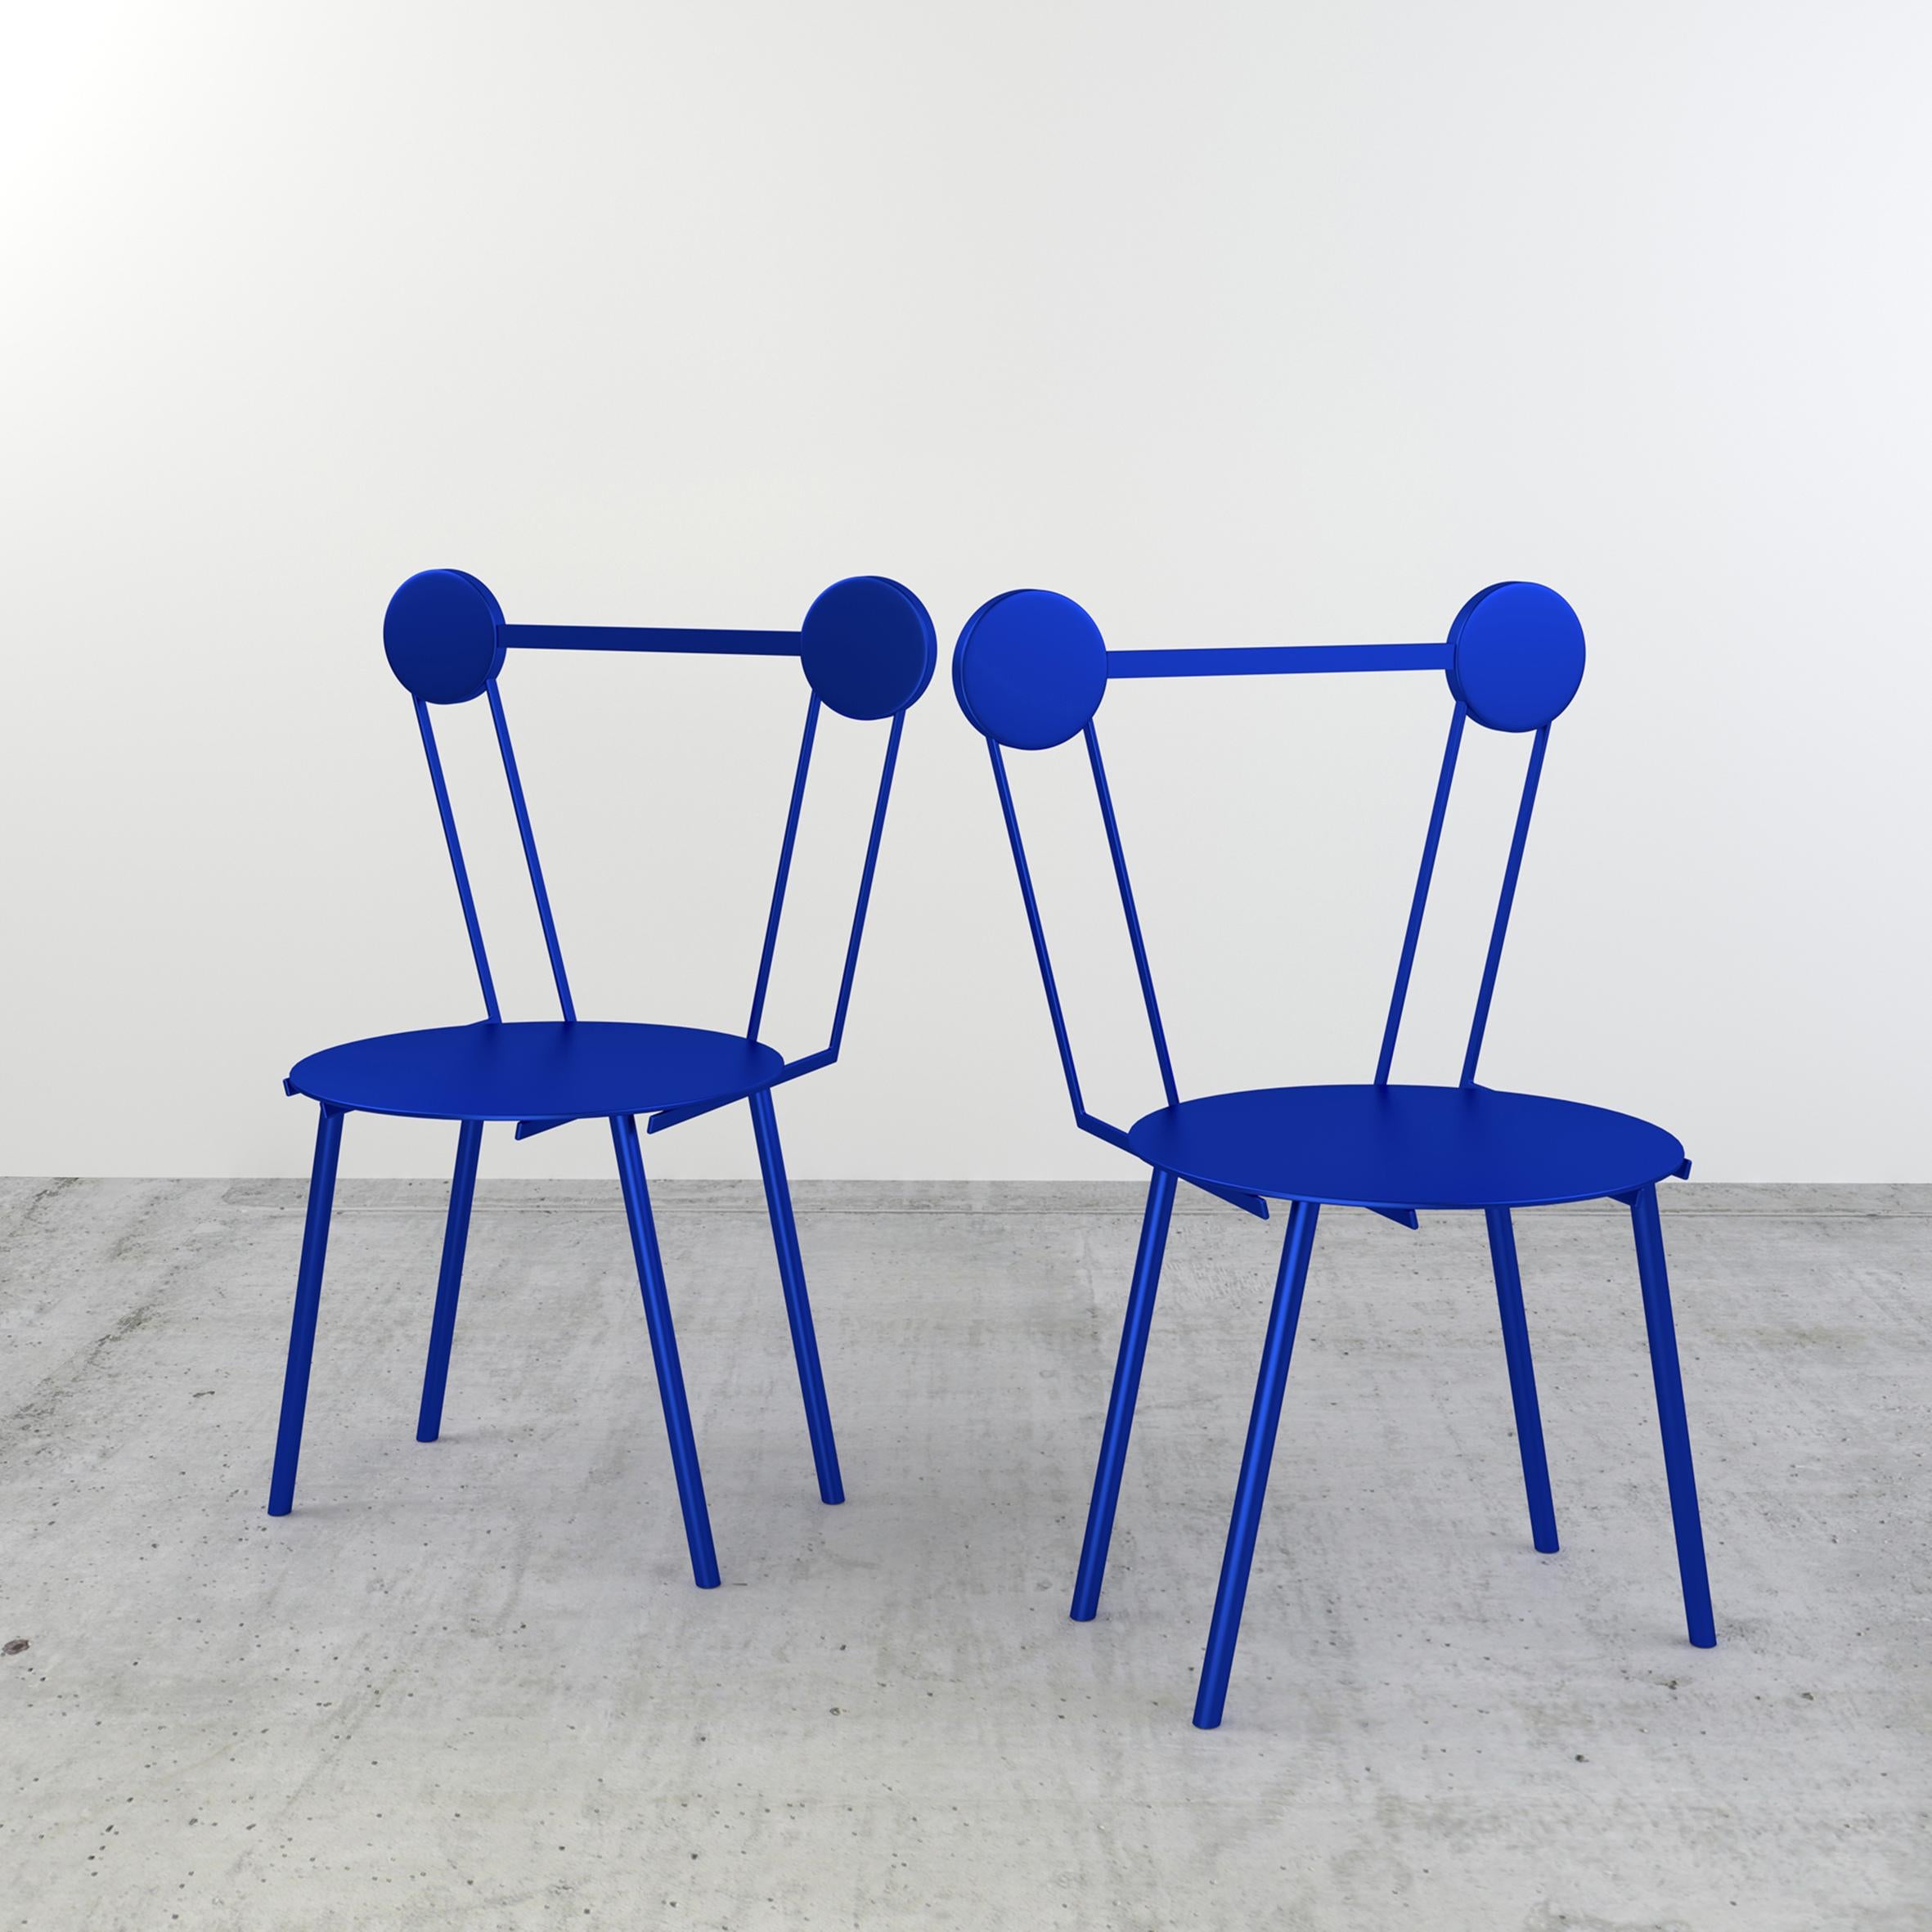 Other Contemporary Chair Blue Haly Aluminium by Chapel Petrassi For Sale